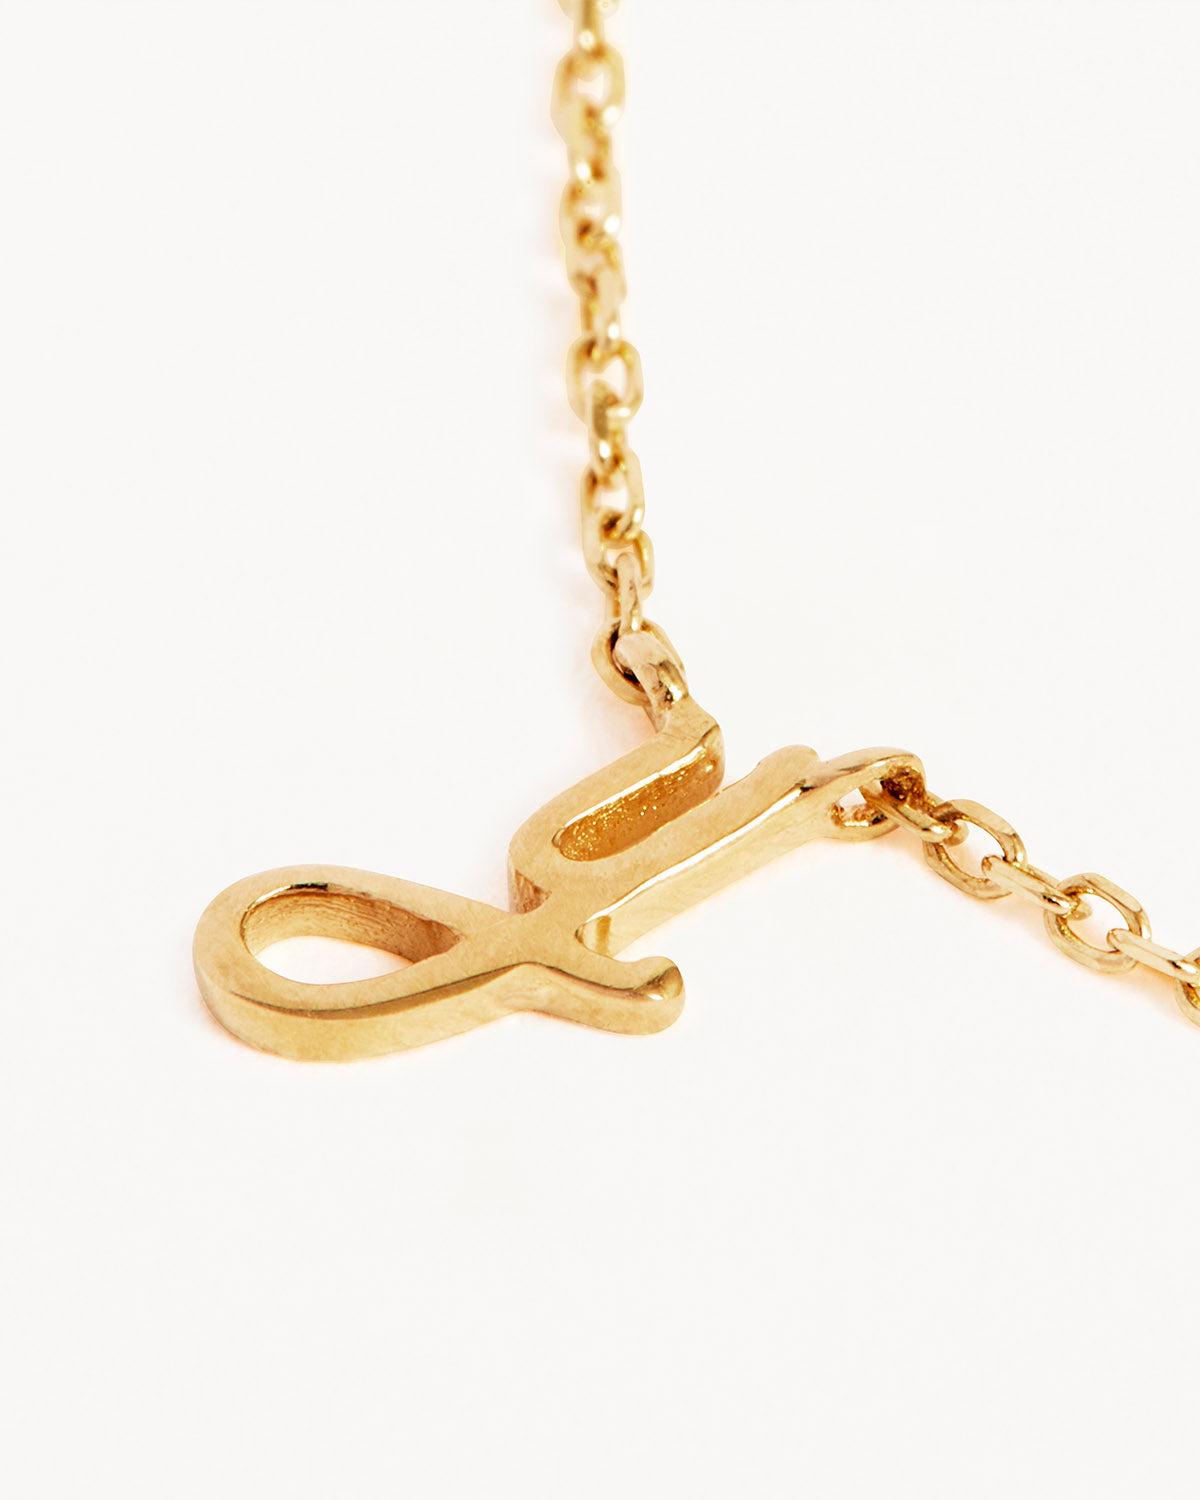 Gold Letter Y Initial Pendant Necklace | INXSKY